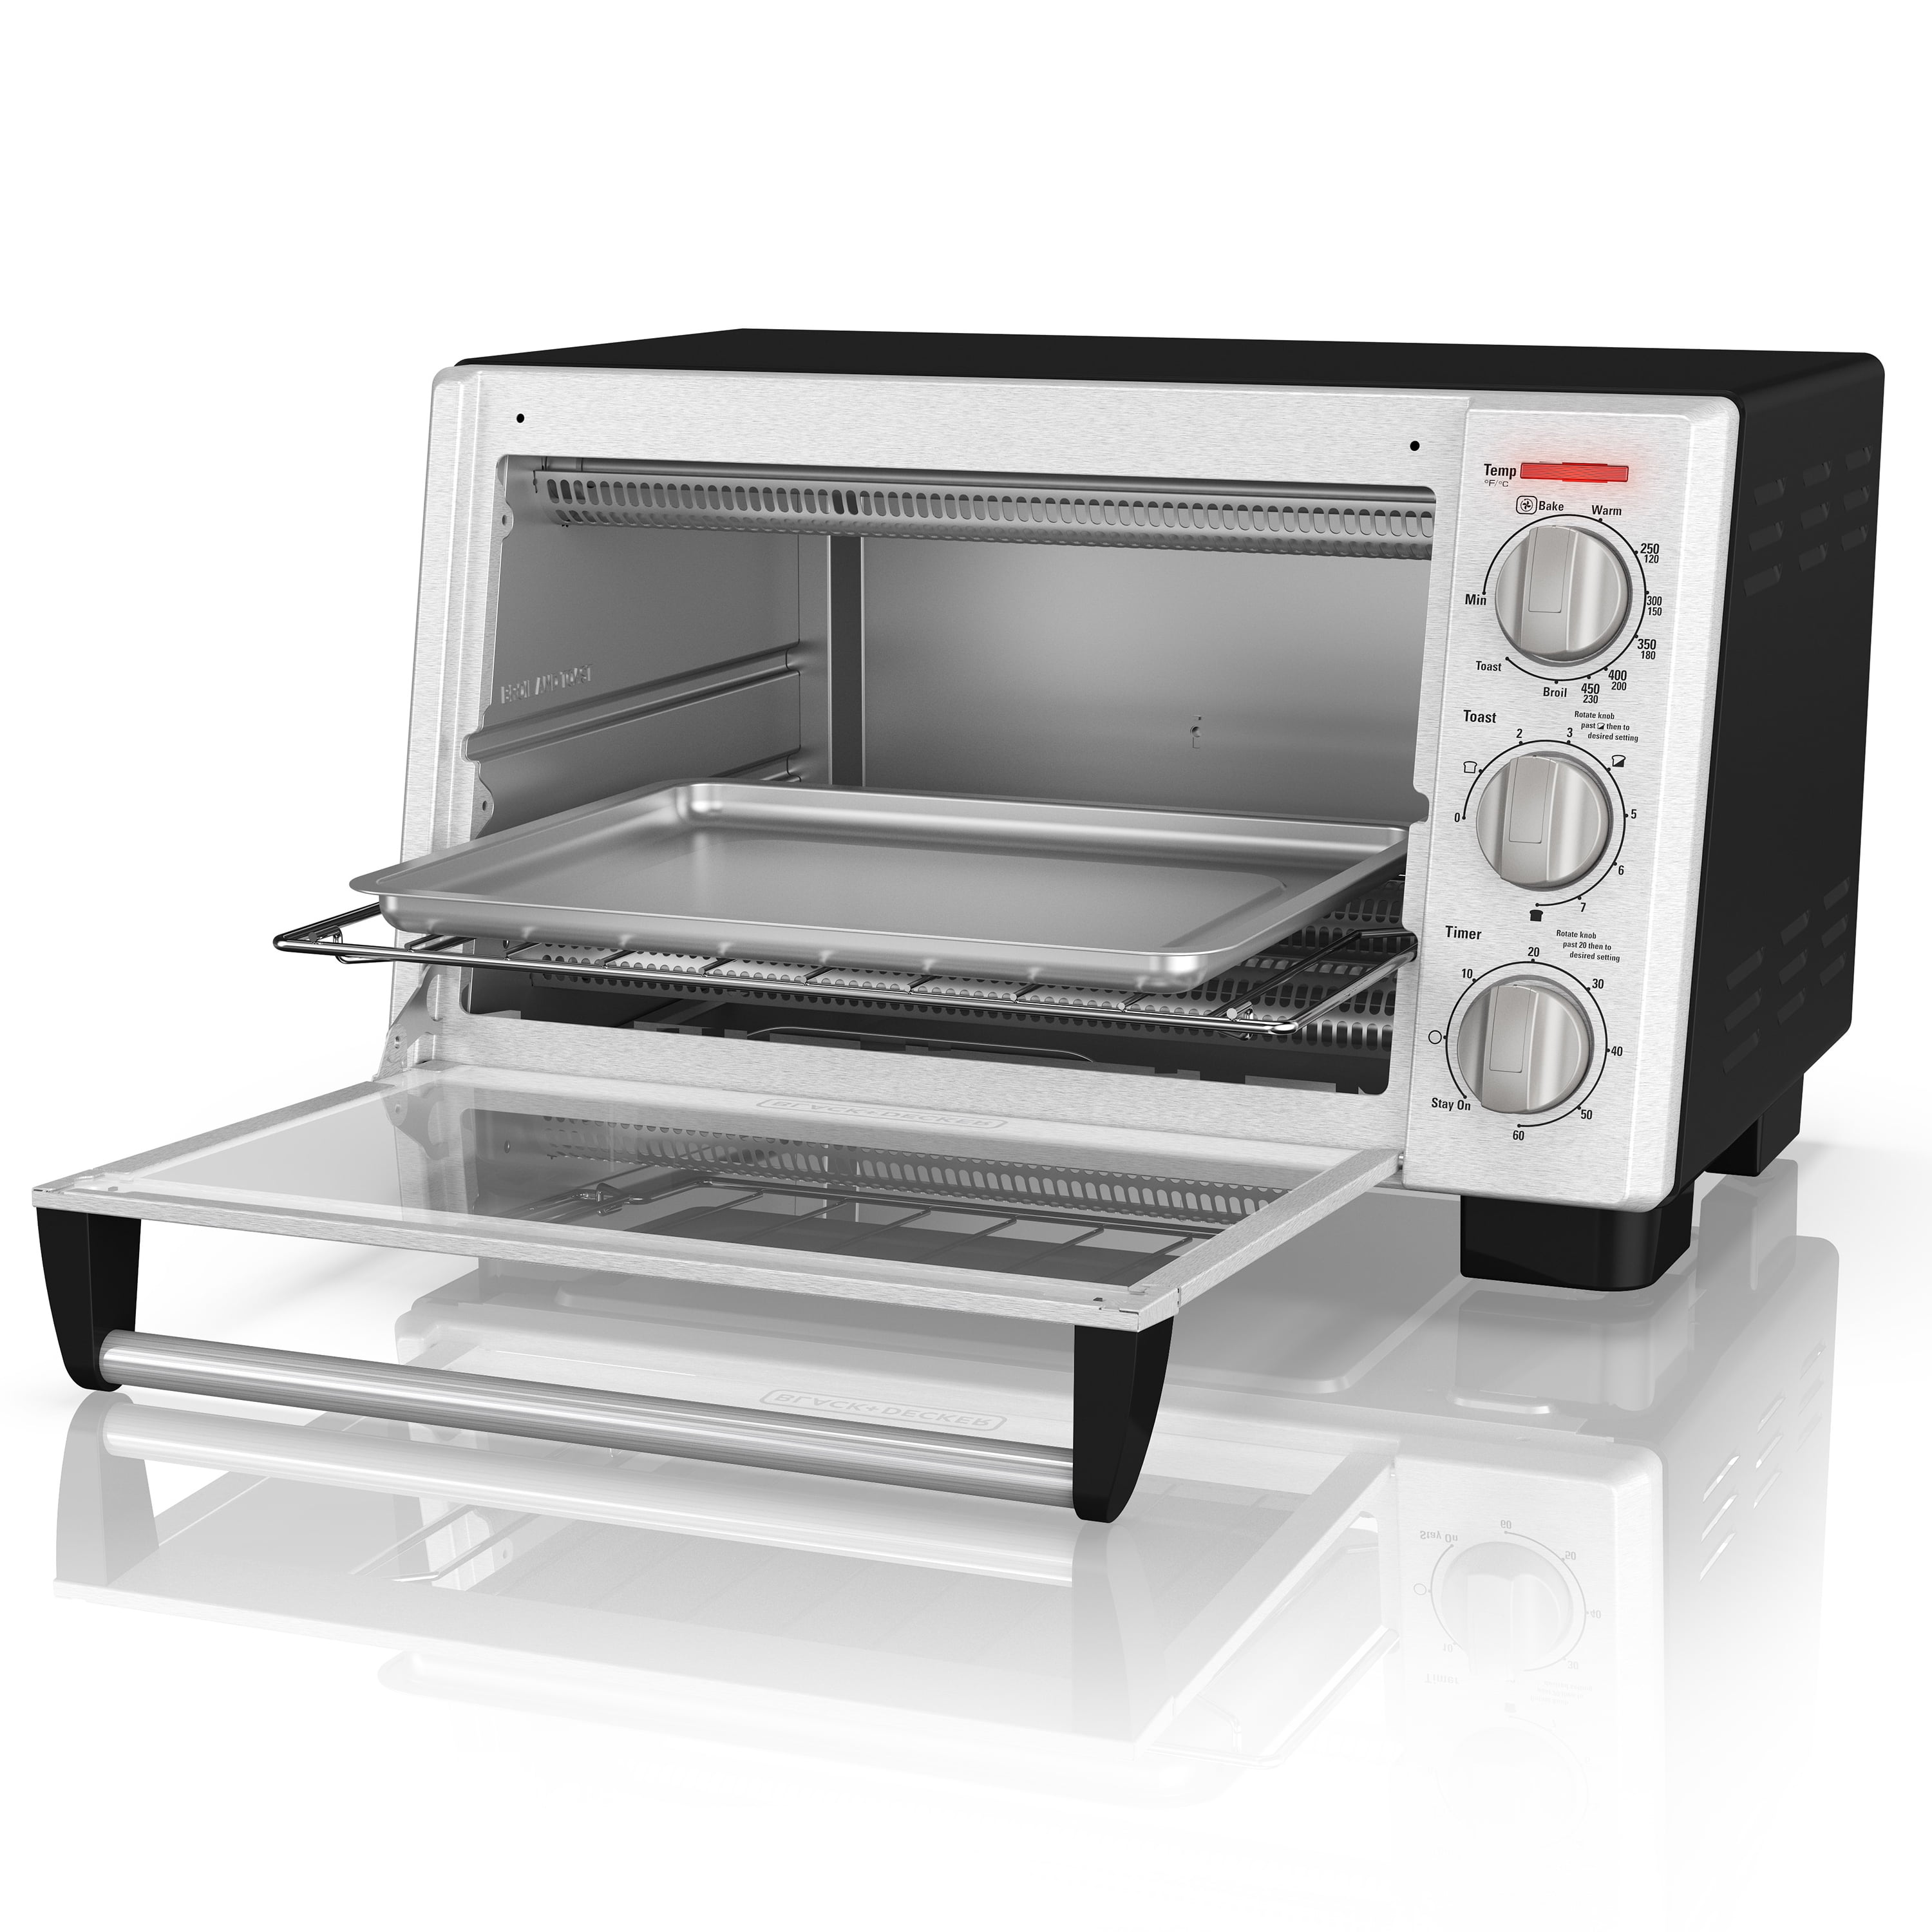 BLACK+DECKER 6-Slice Convection Toaster Oven, Stainless Steel, TO2055S 